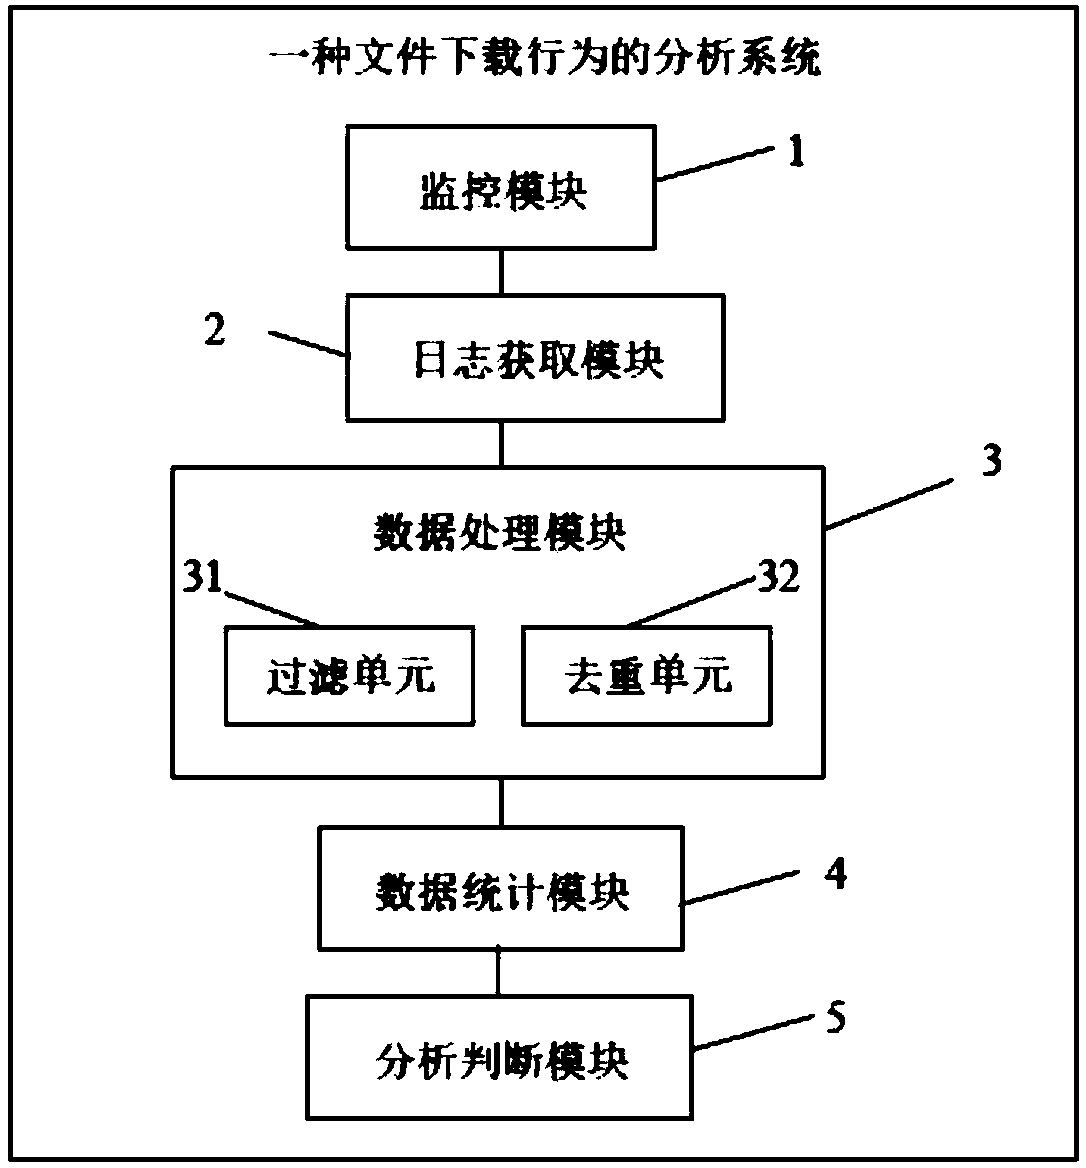 File downloading behavior analysis method and system and intelligent terminal